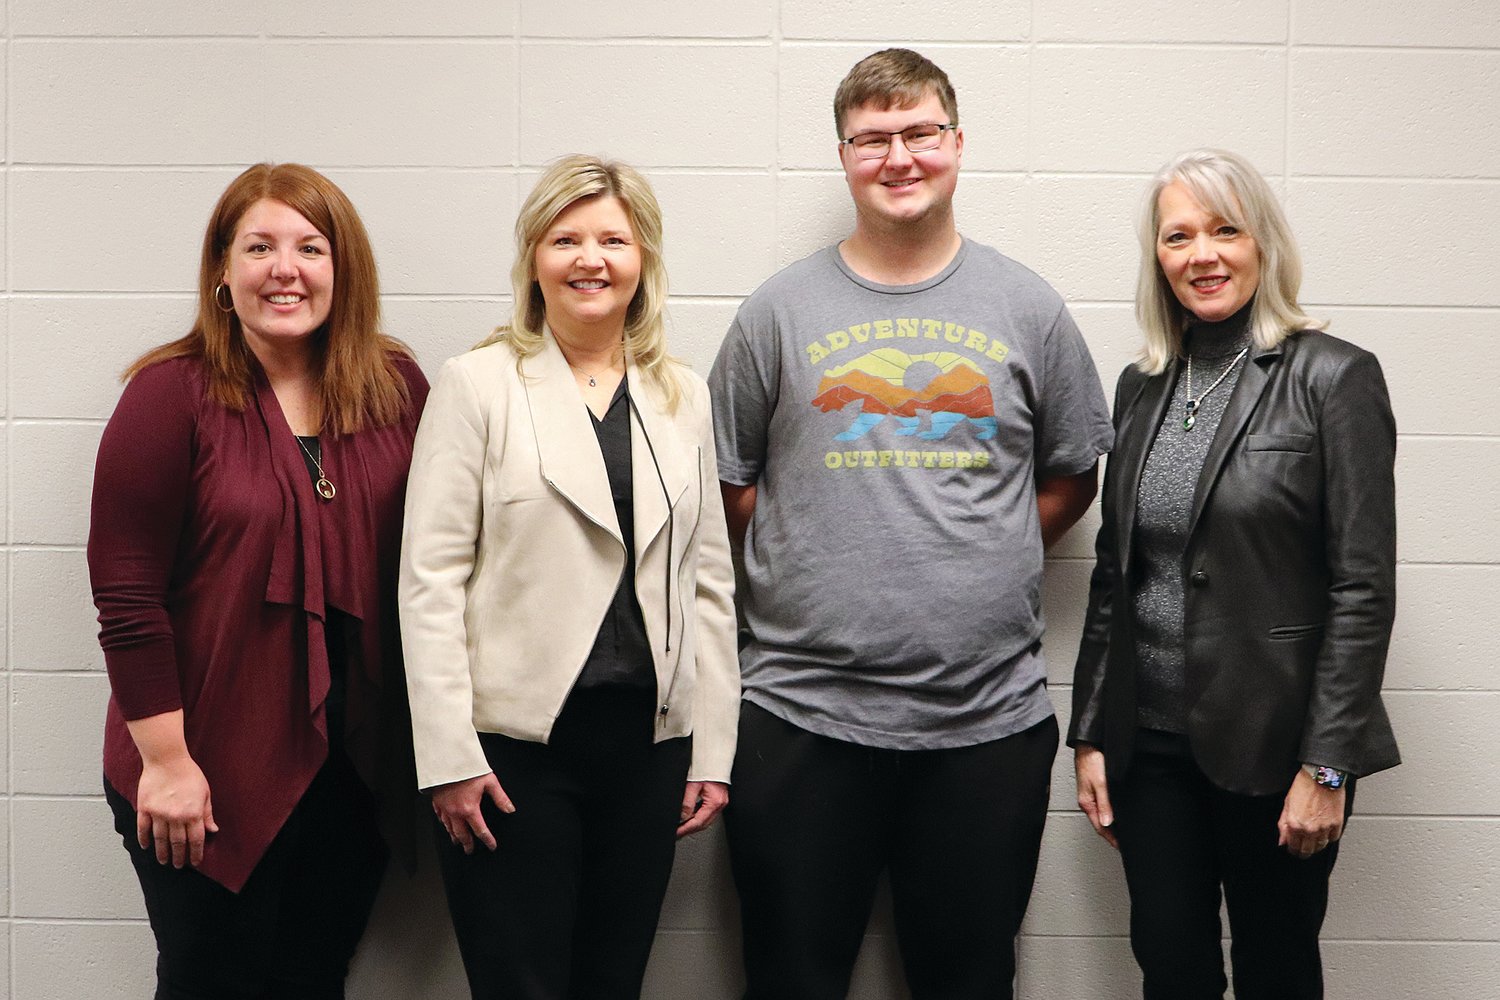 Montgomery County Community Foundation representatives pictured with Gabriel Little are, from left, Sarah Storms, Kelly Taylor, and Debbie Schavietello.